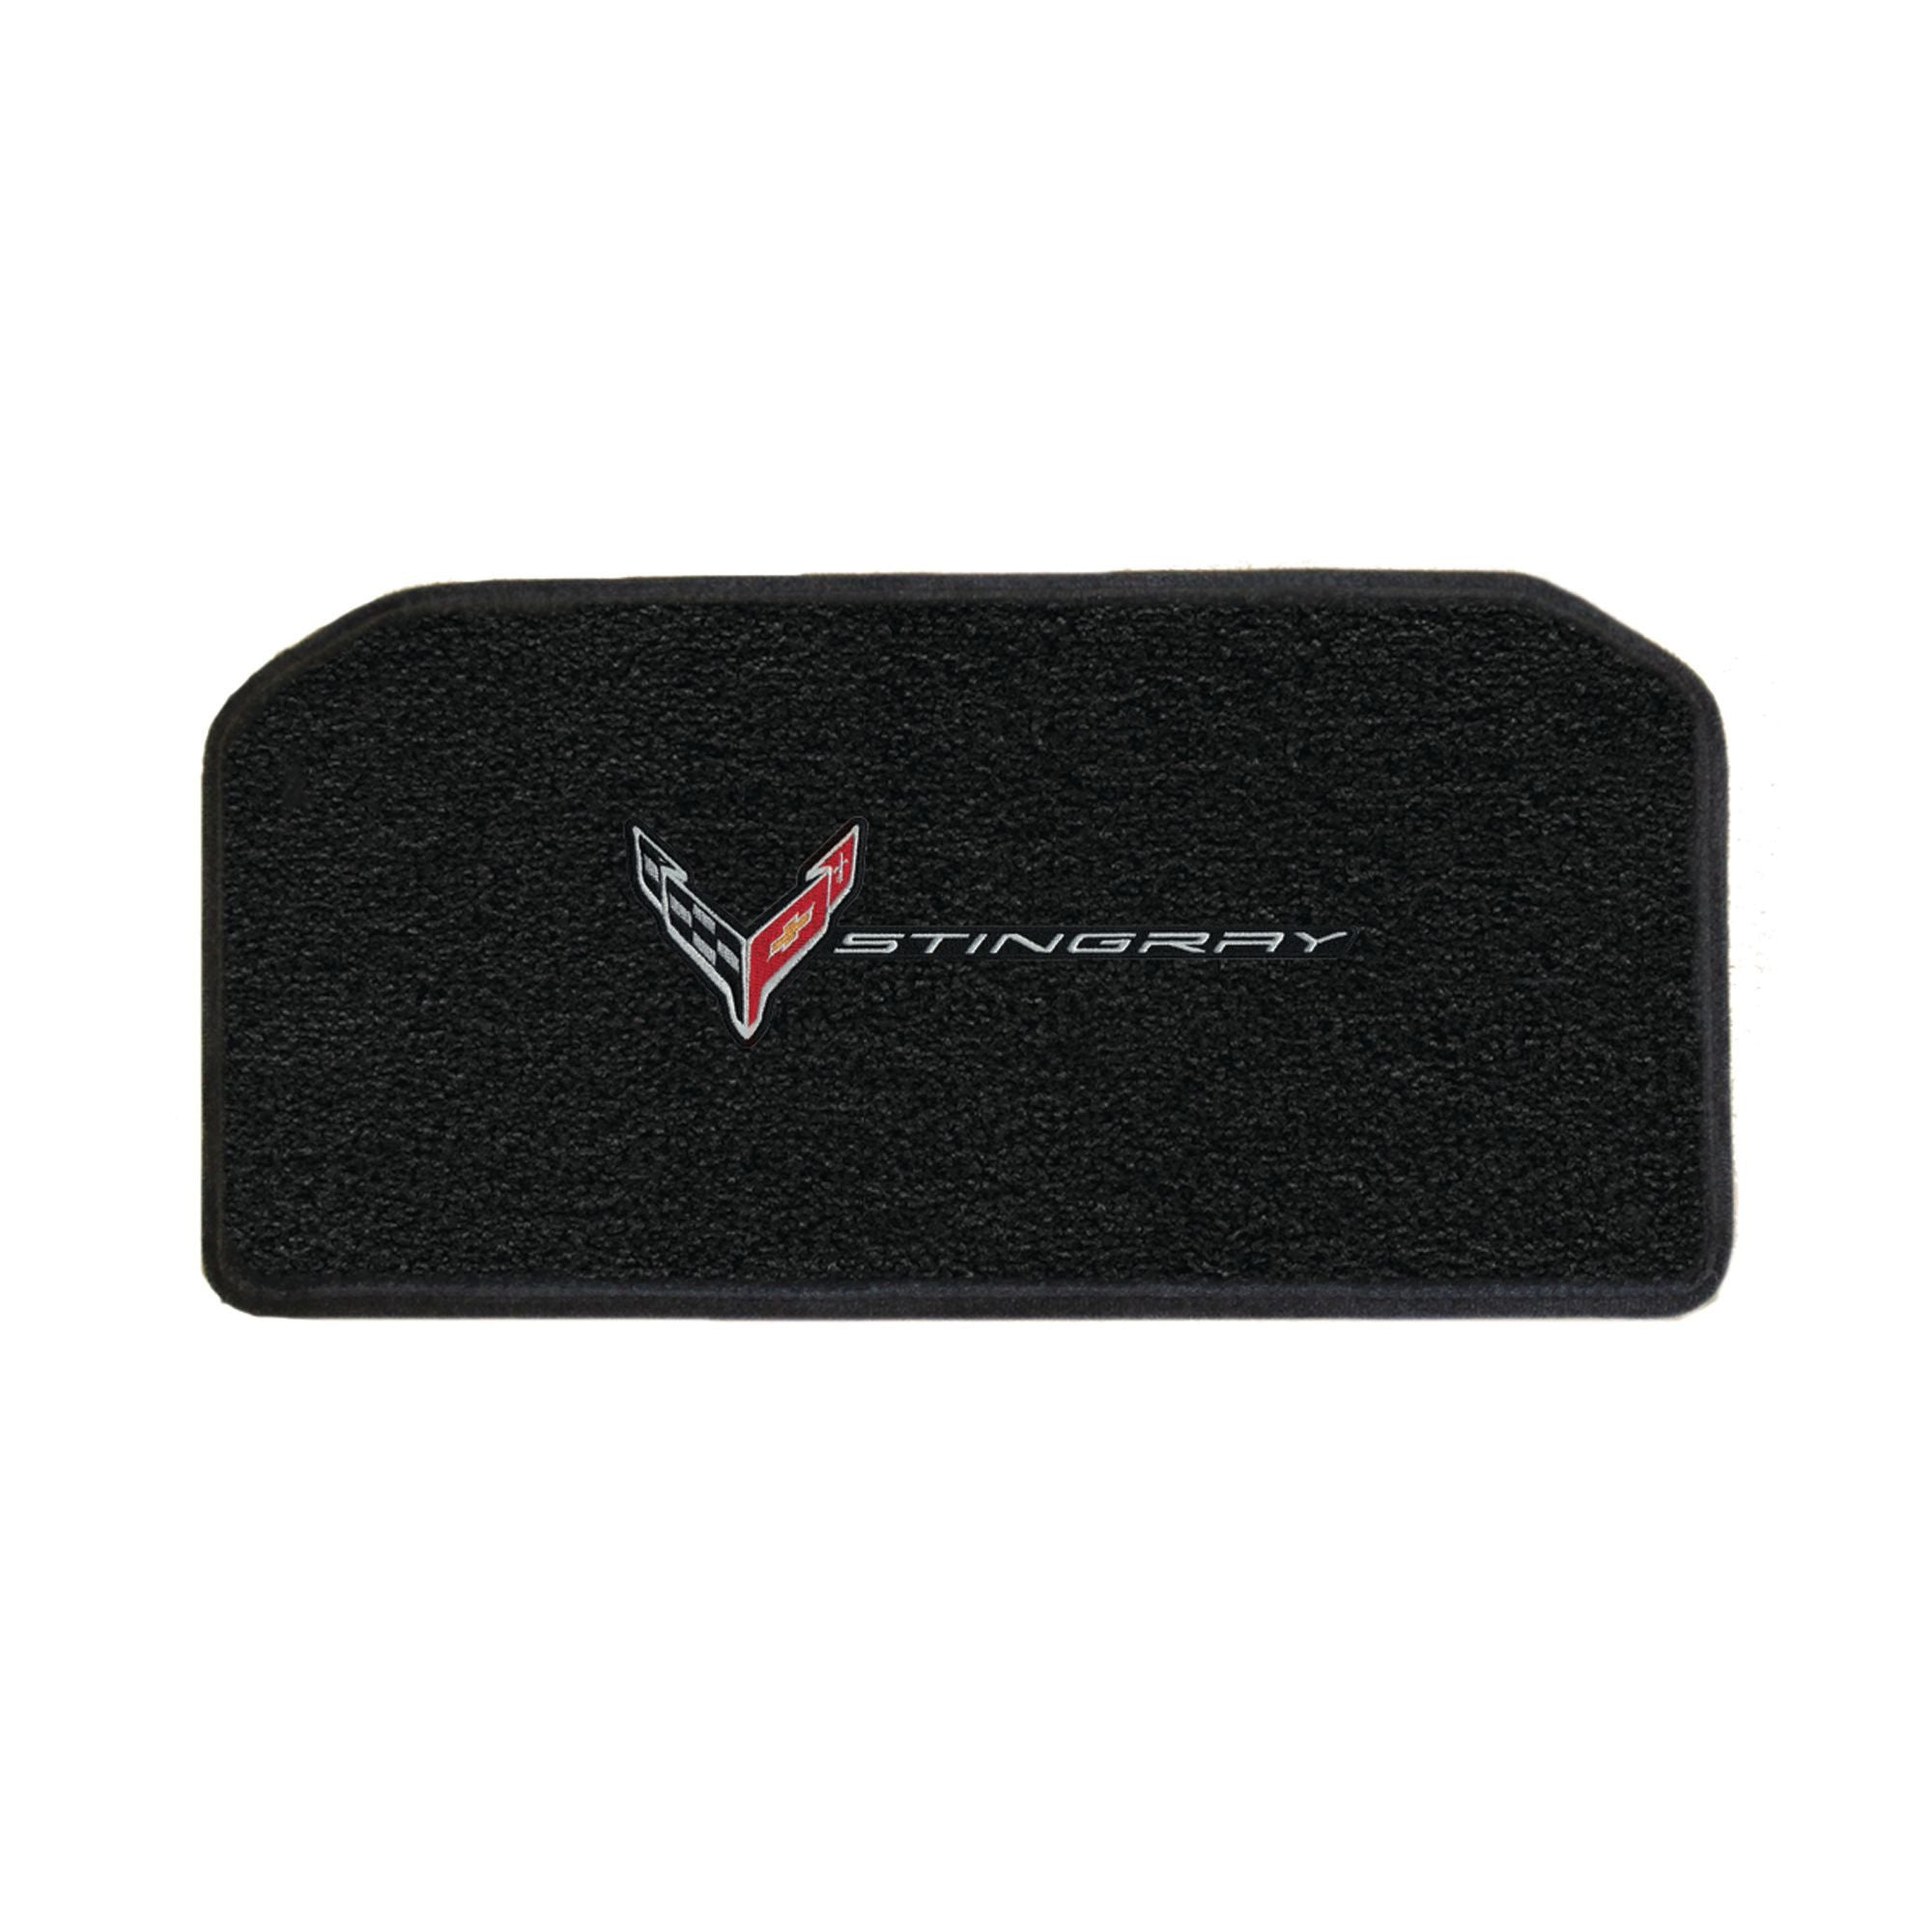 C8 Corvette Front Cargo Mat - Lloyds Mats With Flags and Stingray Combo